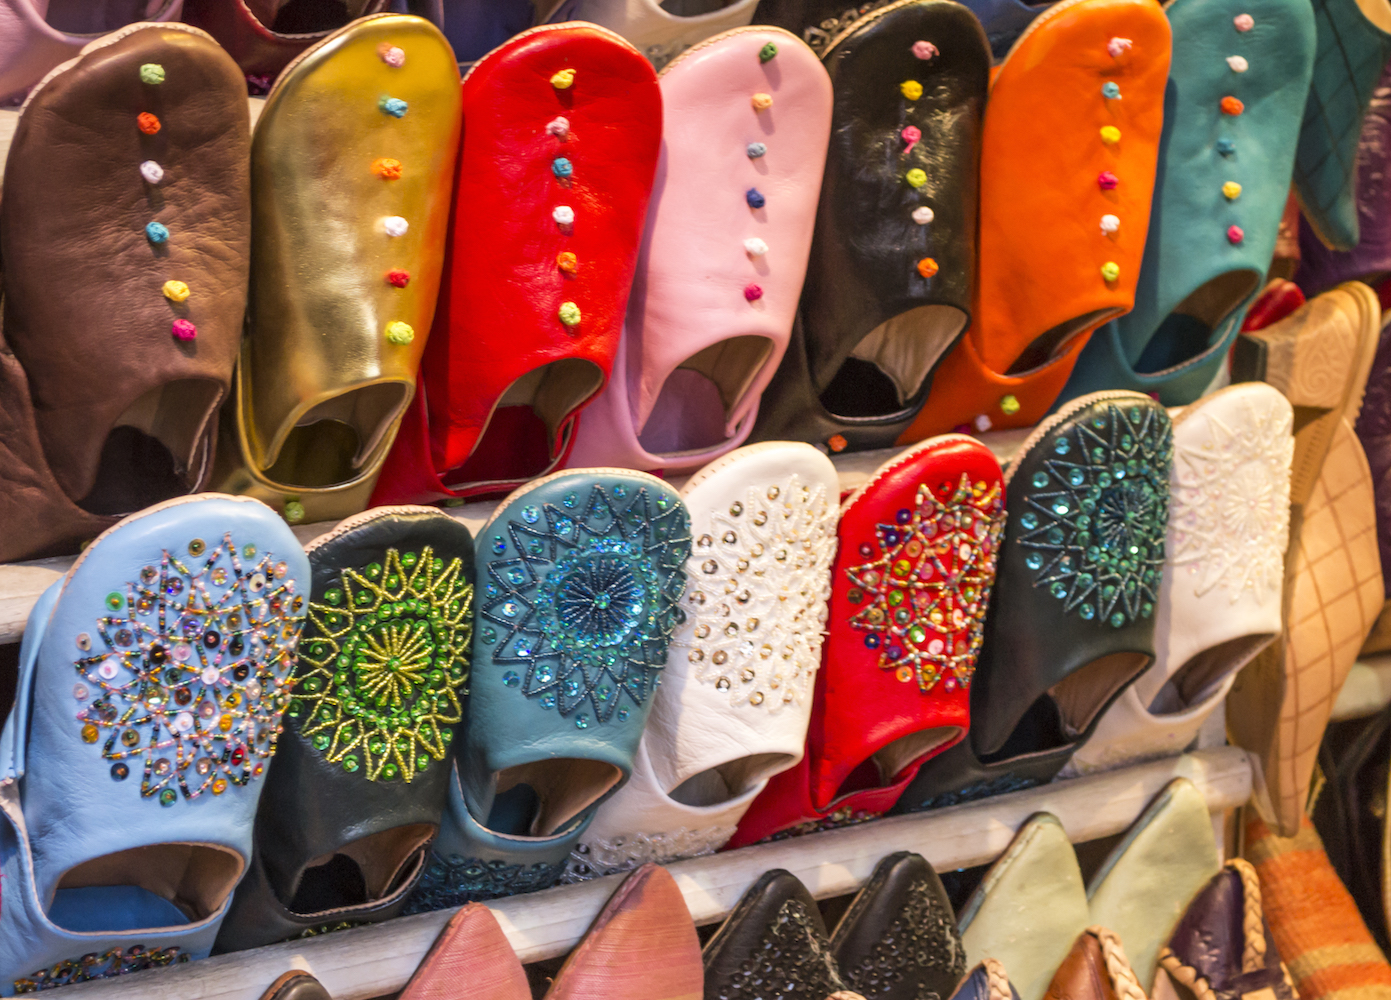 Colourful slippers on display in a Marrakech market stall.jpg